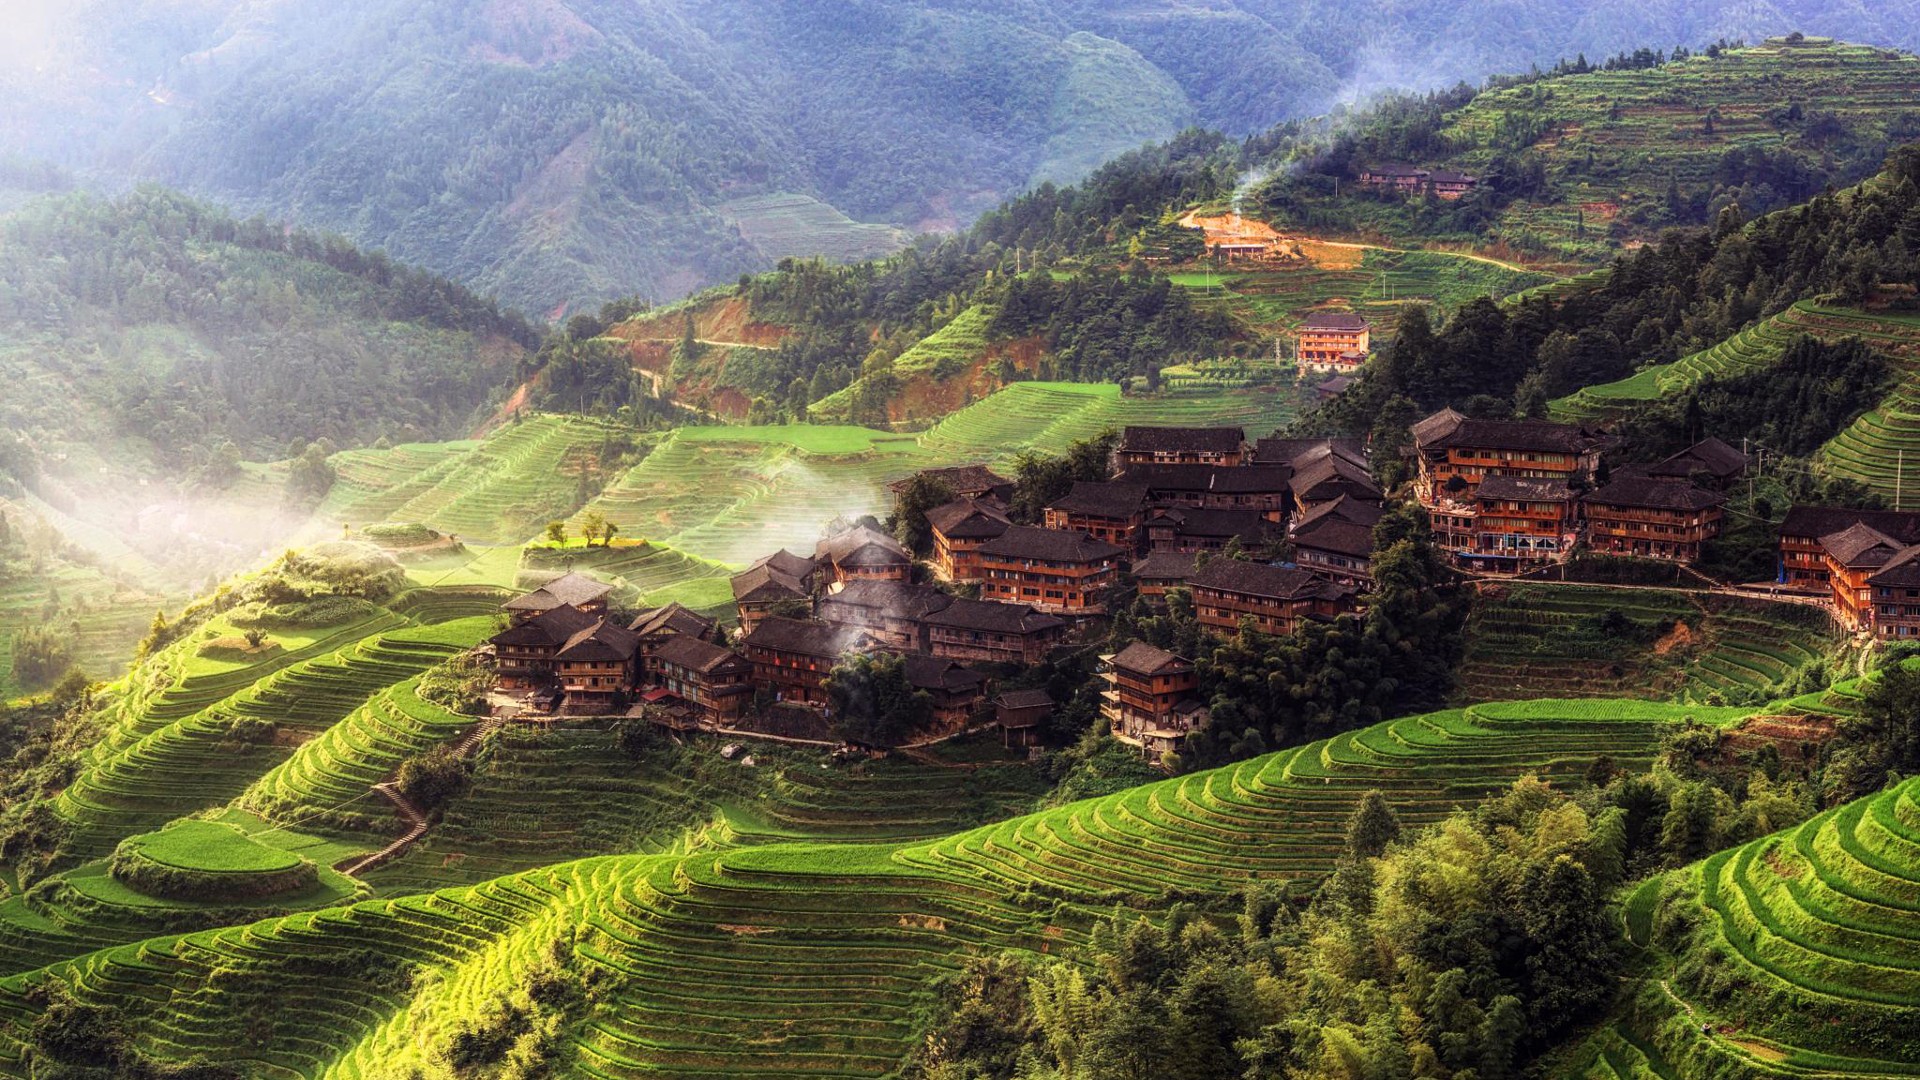 General 1920x1080 China mountains house trees town village nature landscape Asia rice fields morning mist hills forest terraced field Agro (Plants)